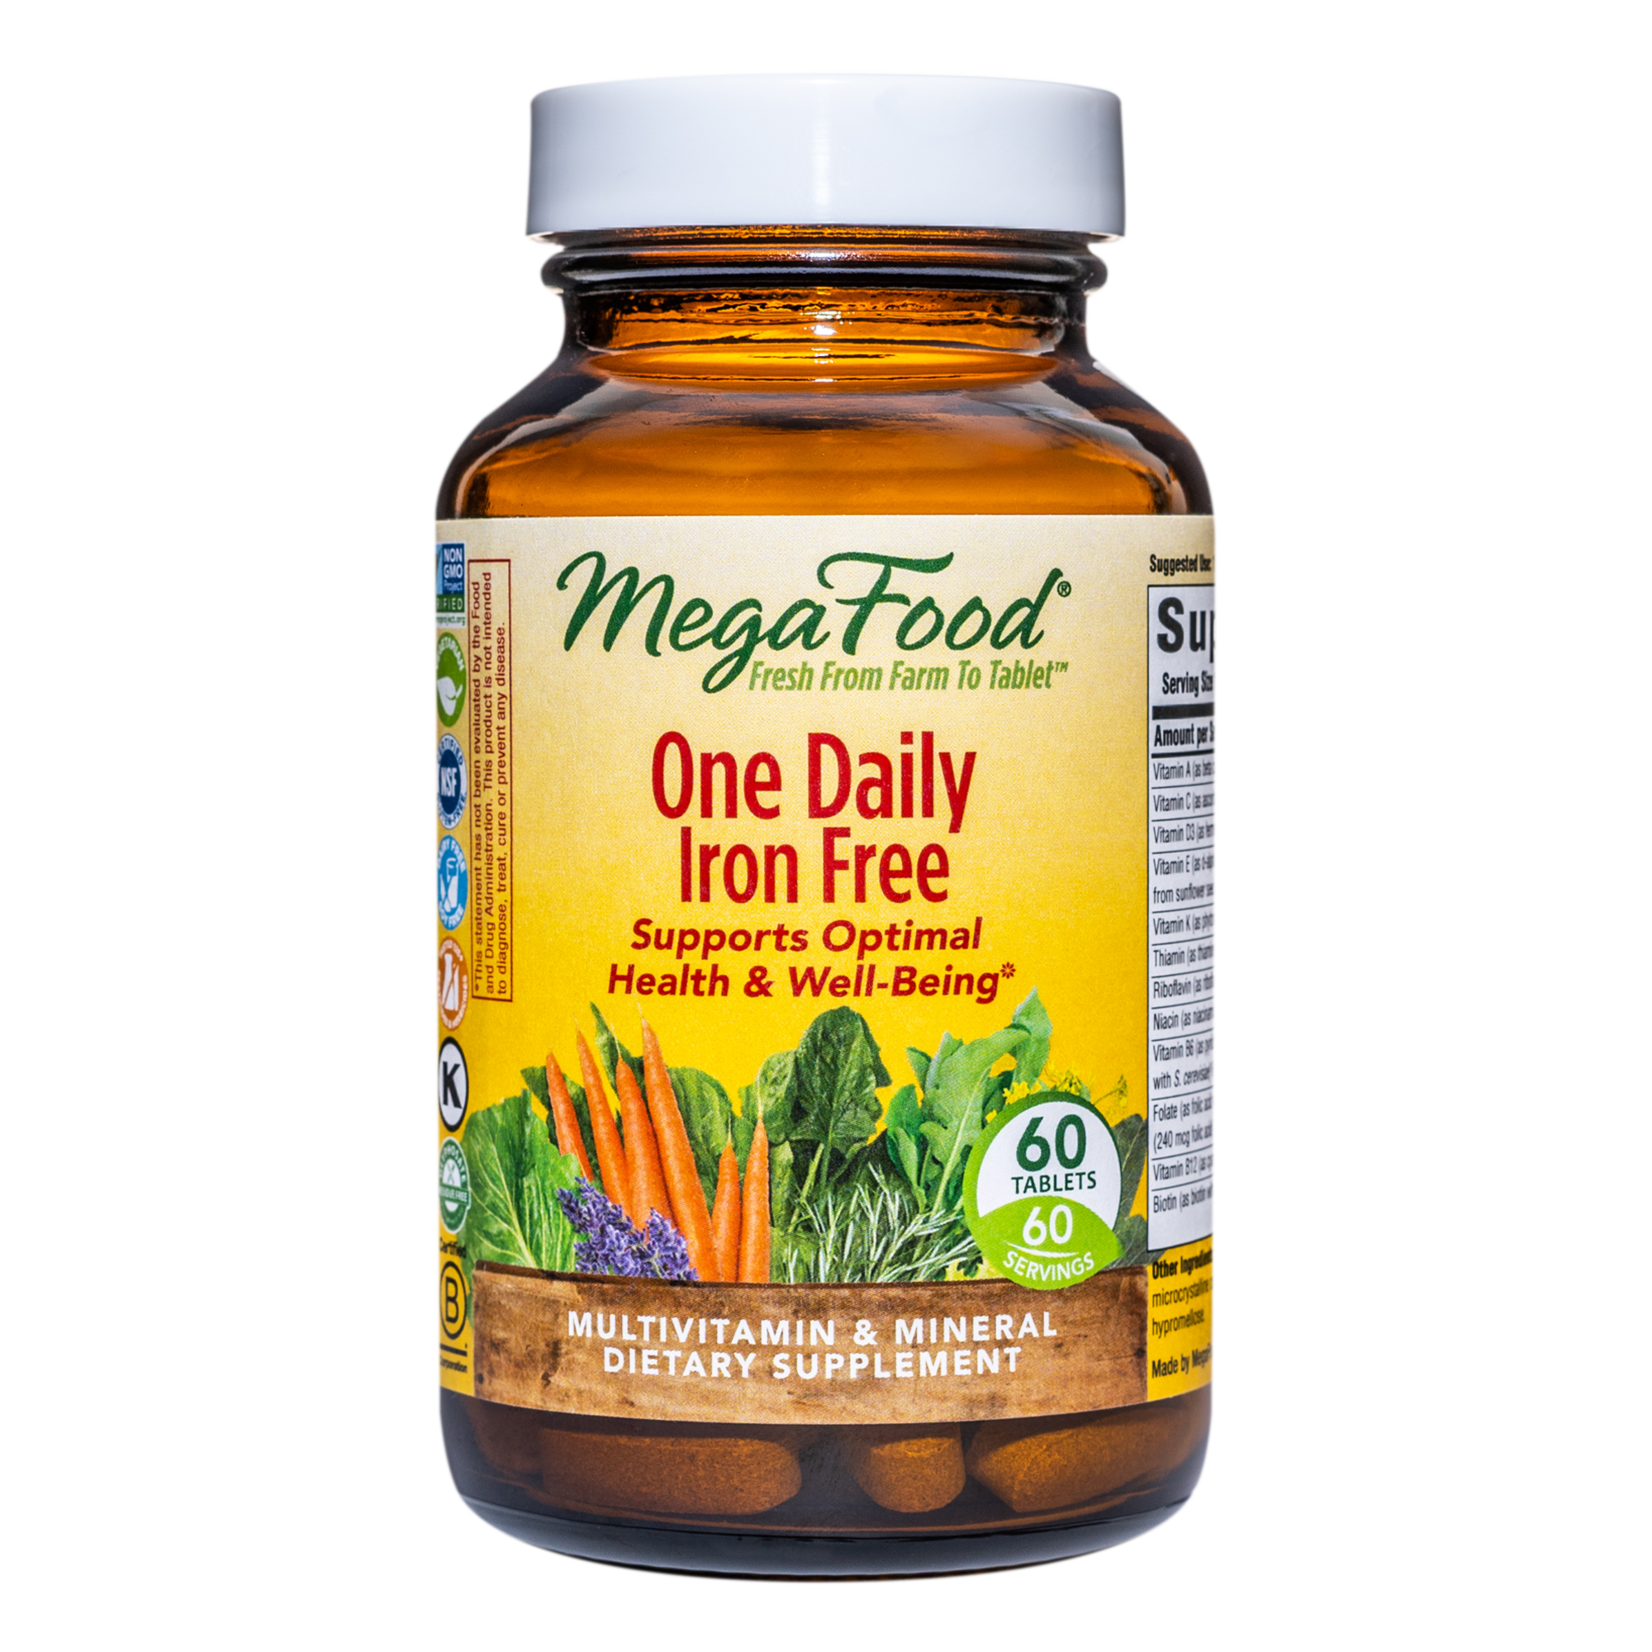 Megafood Megafood - One Daily Iron Free - 60 Tablets